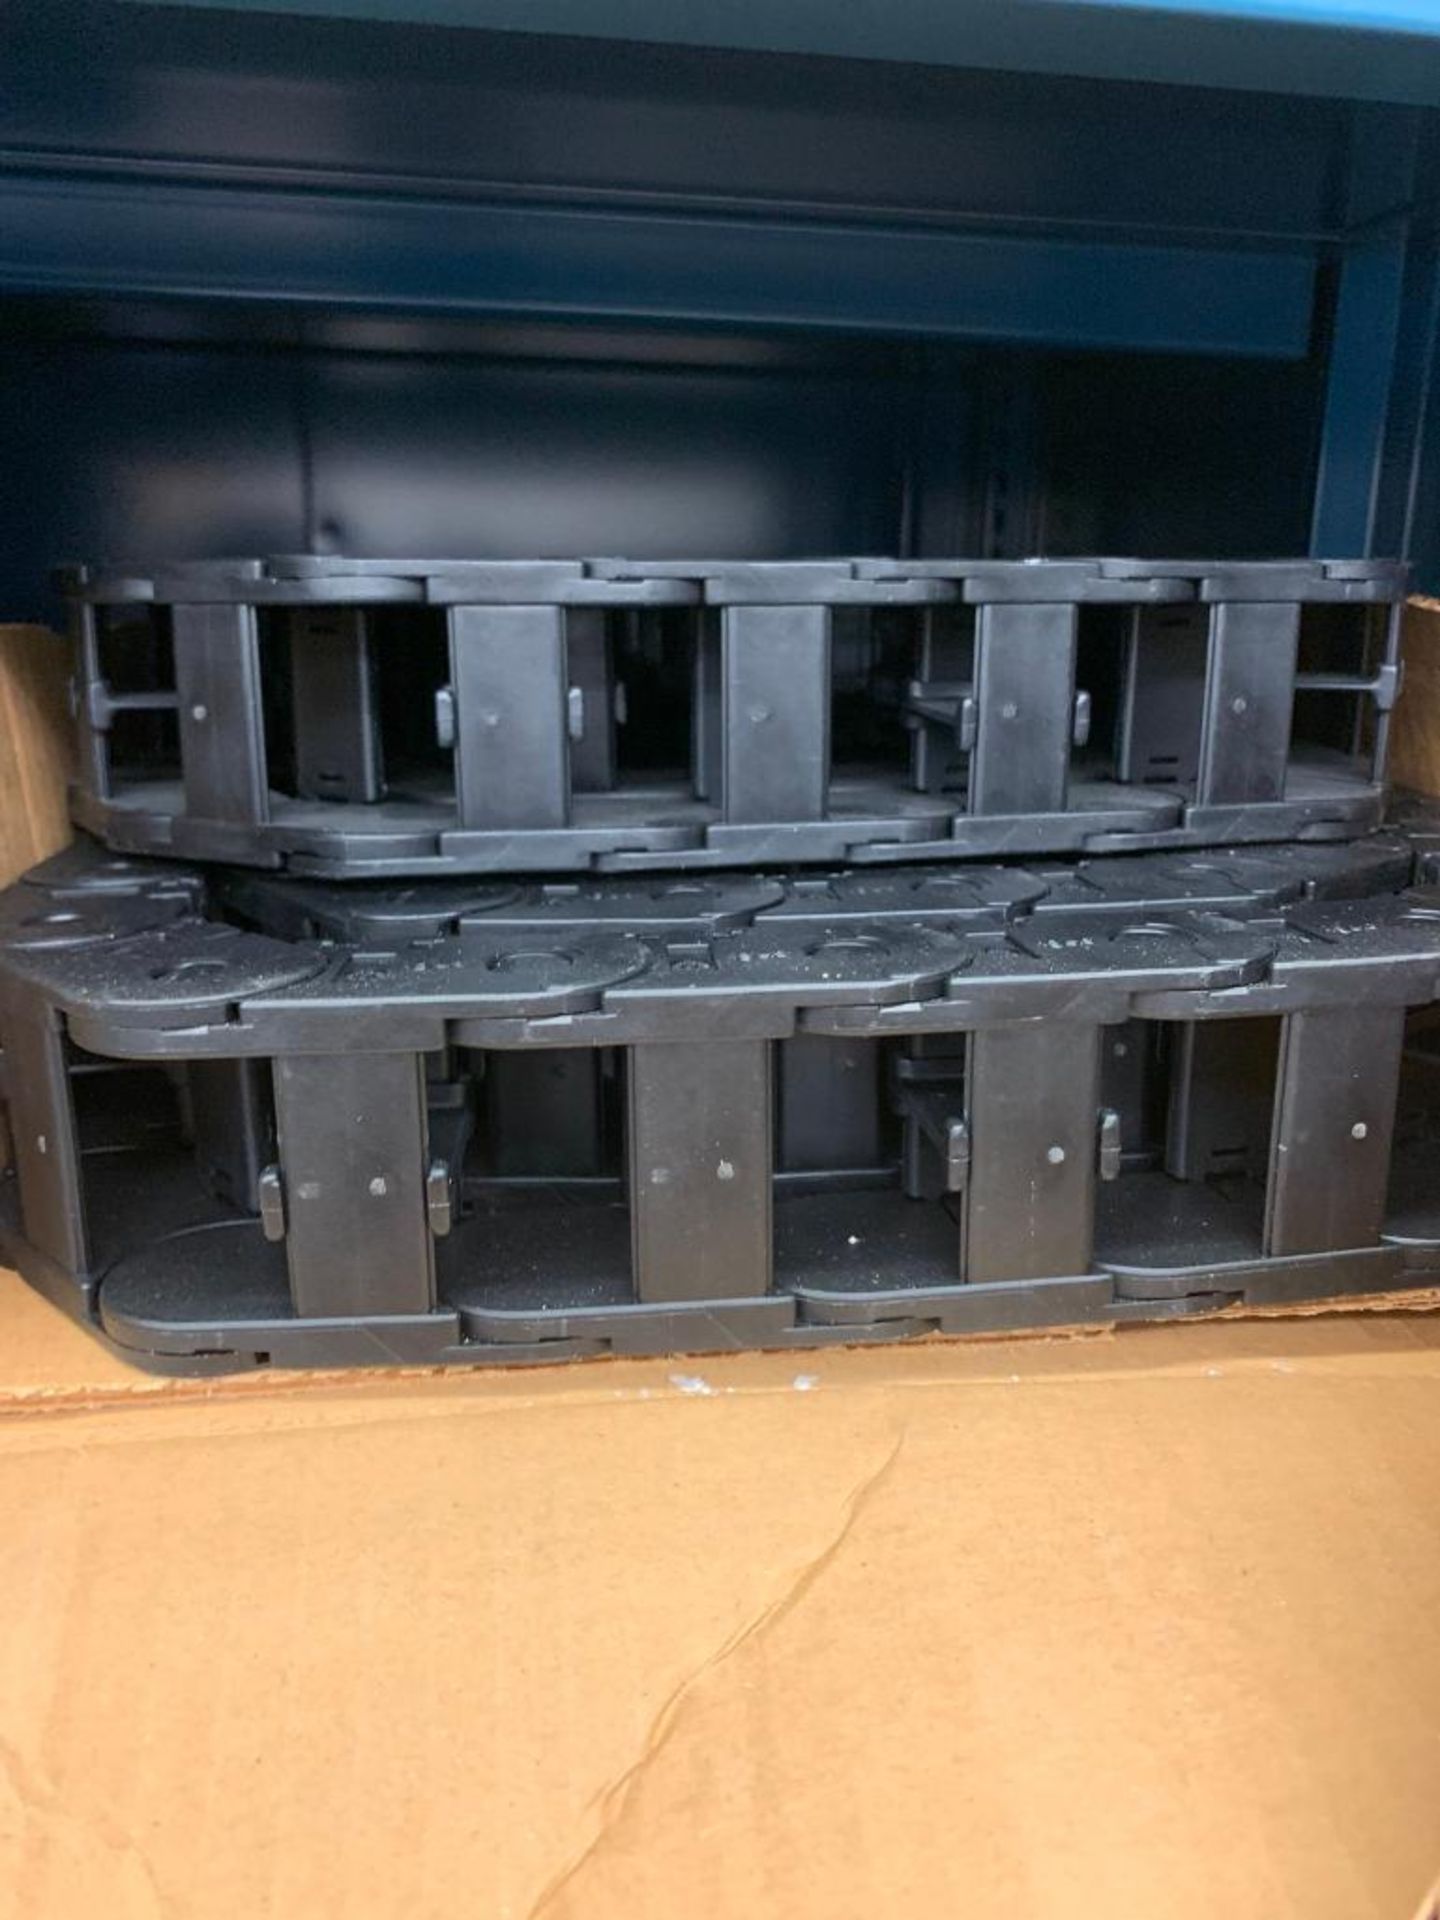 (14x) Vidmar Shelf Units w/ Content in & on Top of; Power Supplies, Circuit Boards, Assorted Modules - Image 17 of 56